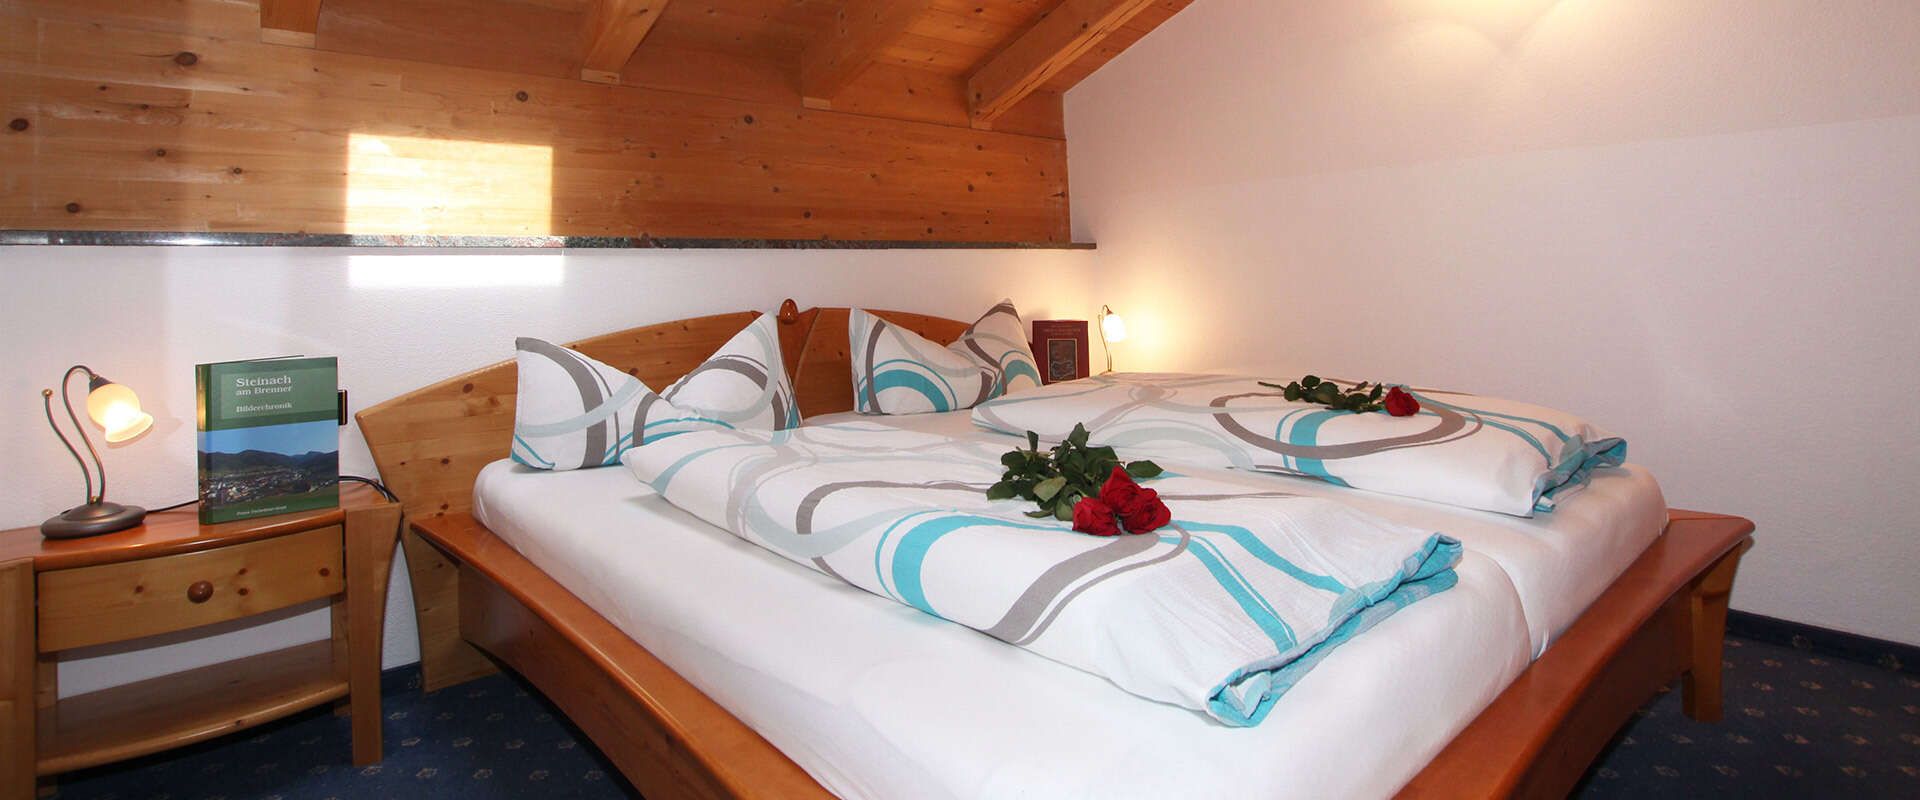 Apartments at the Seaper Ranch in Steinach am Brenner, Tyrol